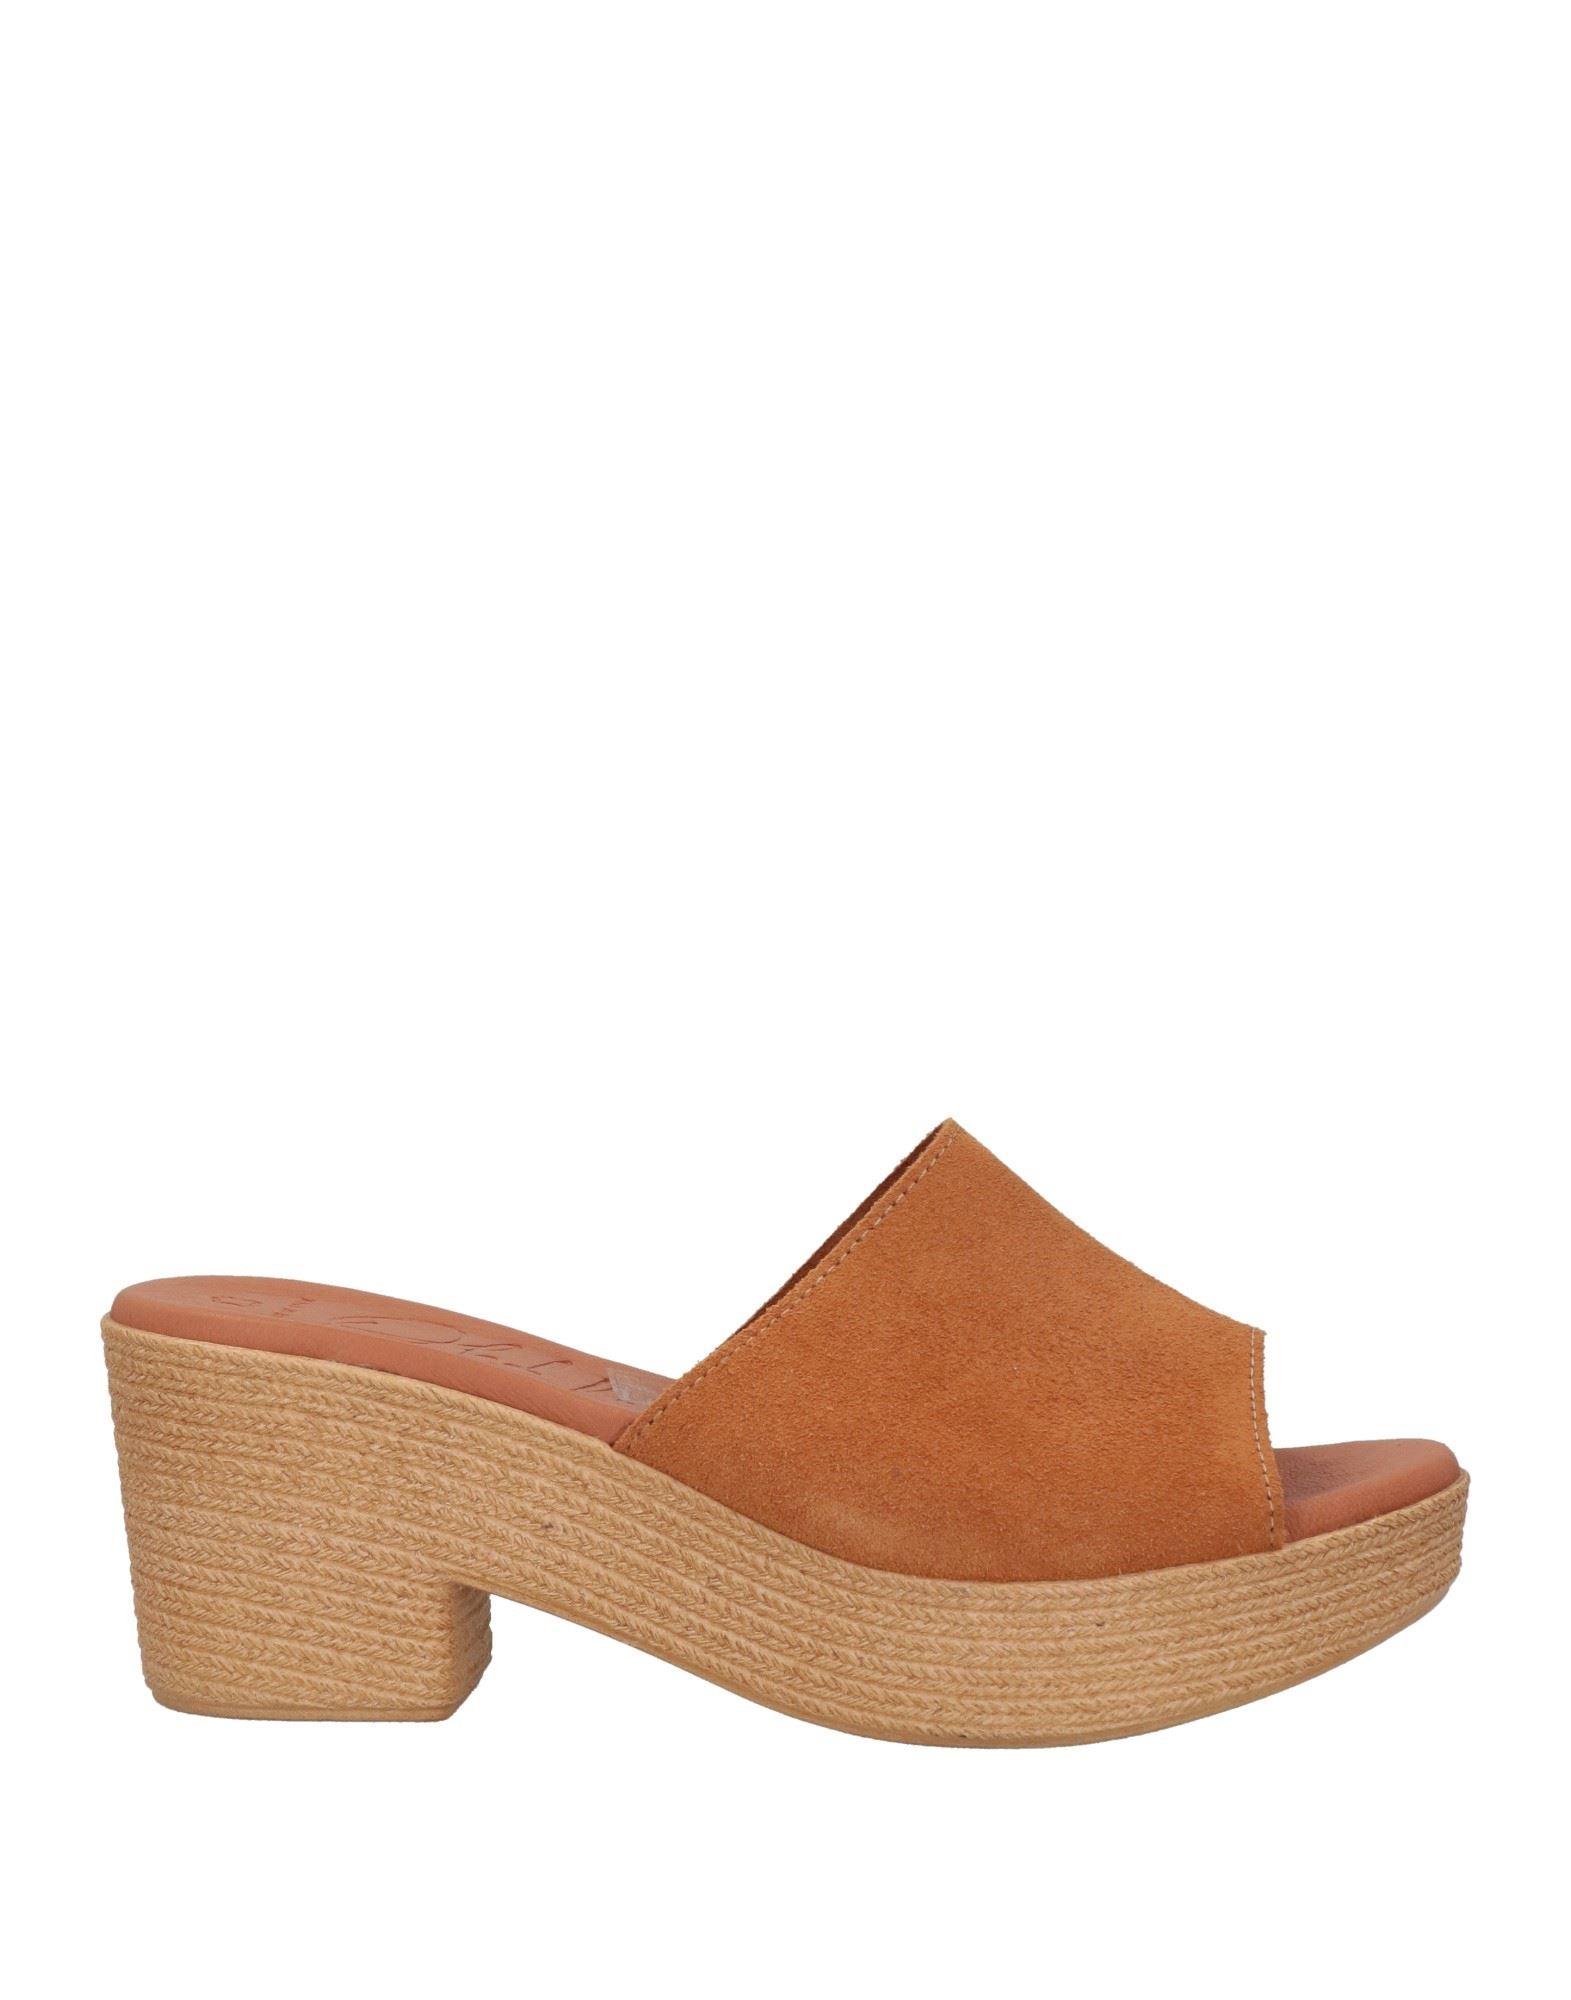 Oh My Sandals Espadrilles in Brown | Lyst